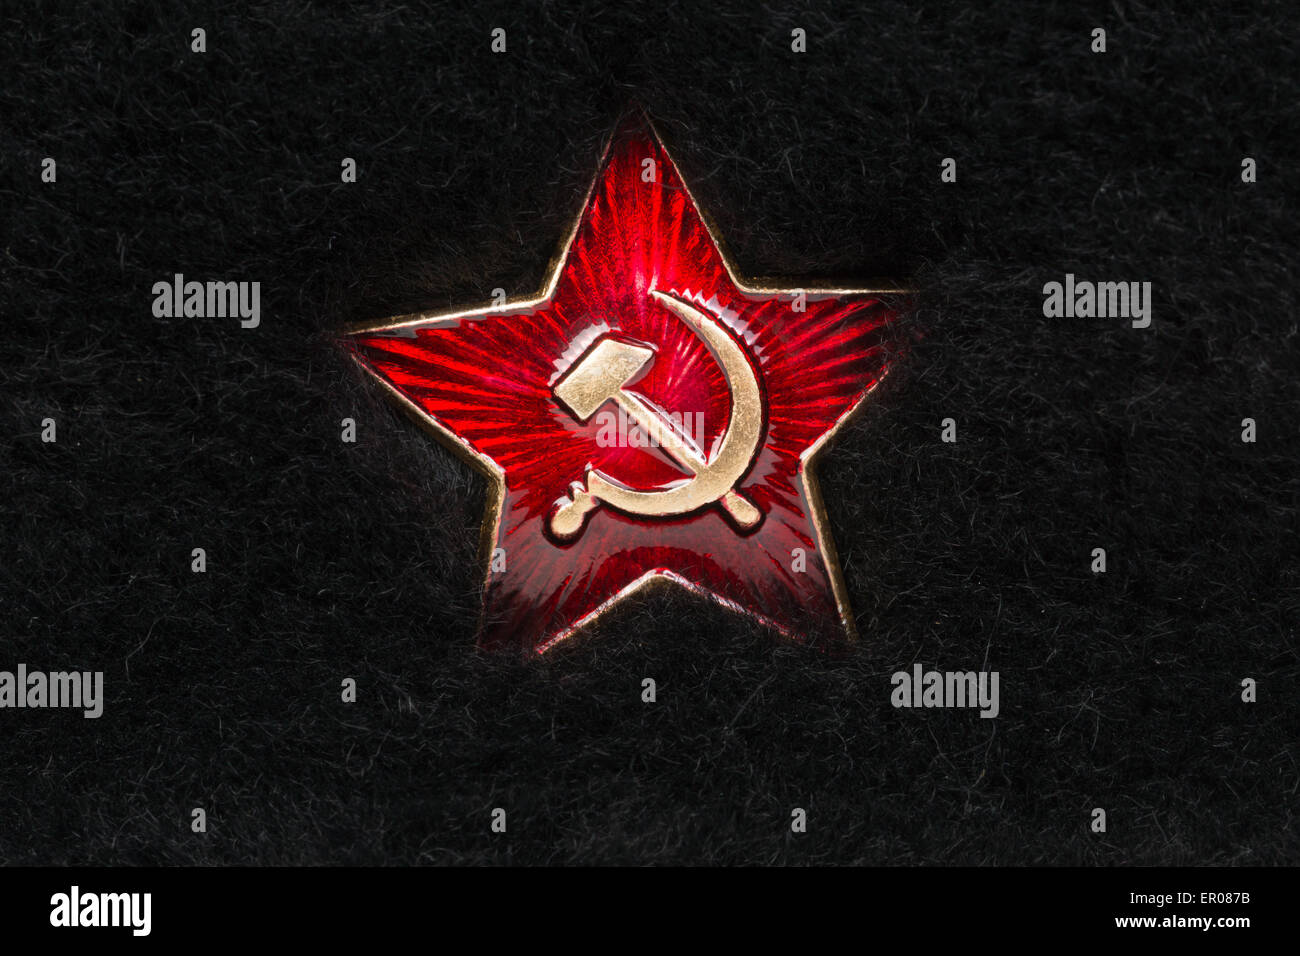 Russian Red Star with Hammer and Sickle on Fur Stock Photo